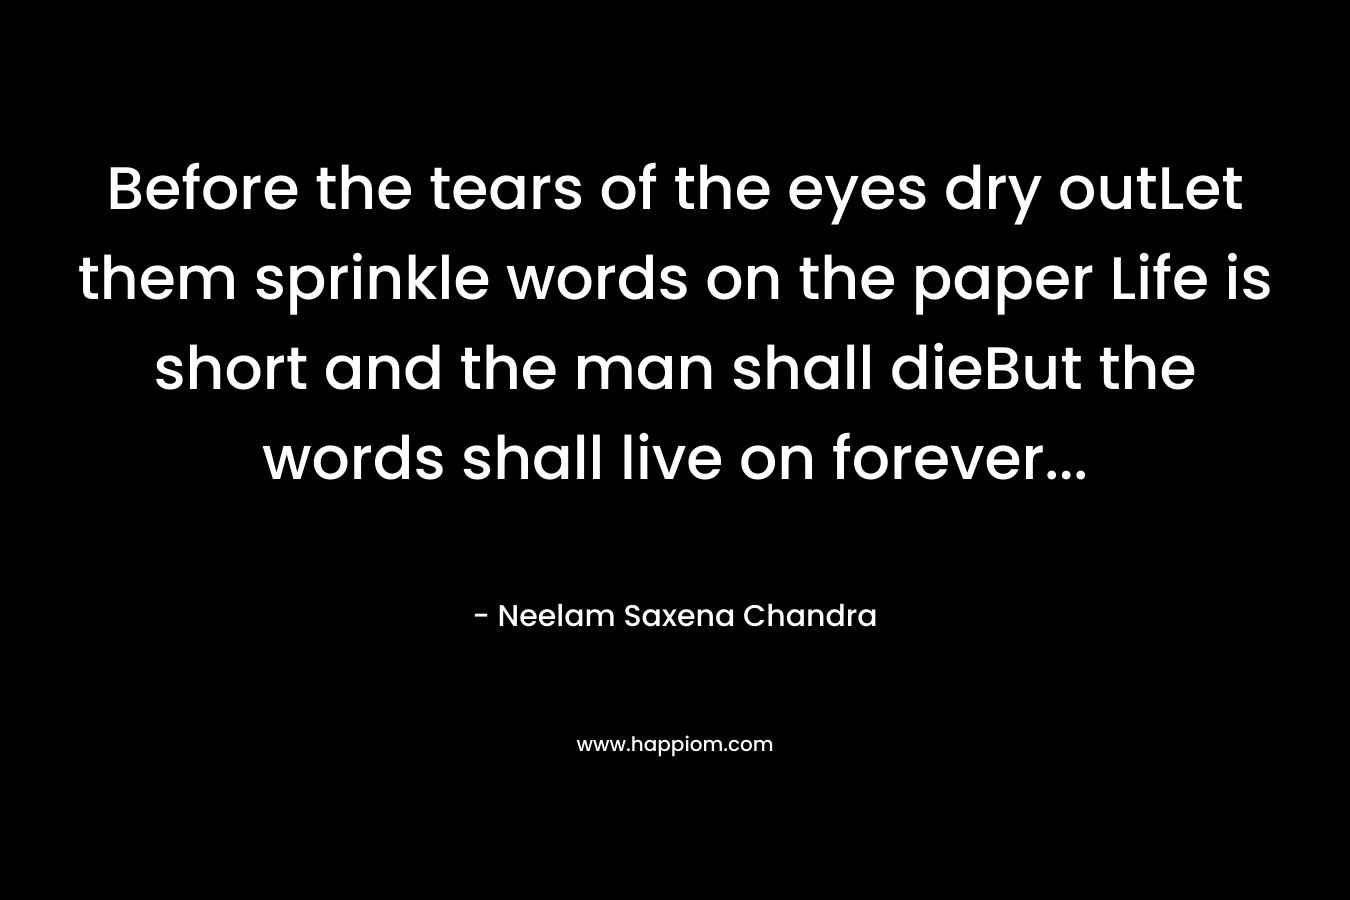 Before the tears of the eyes dry outLet them sprinkle words on the paper Life is short and the man shall dieBut the words shall live on forever… – Neelam Saxena Chandra